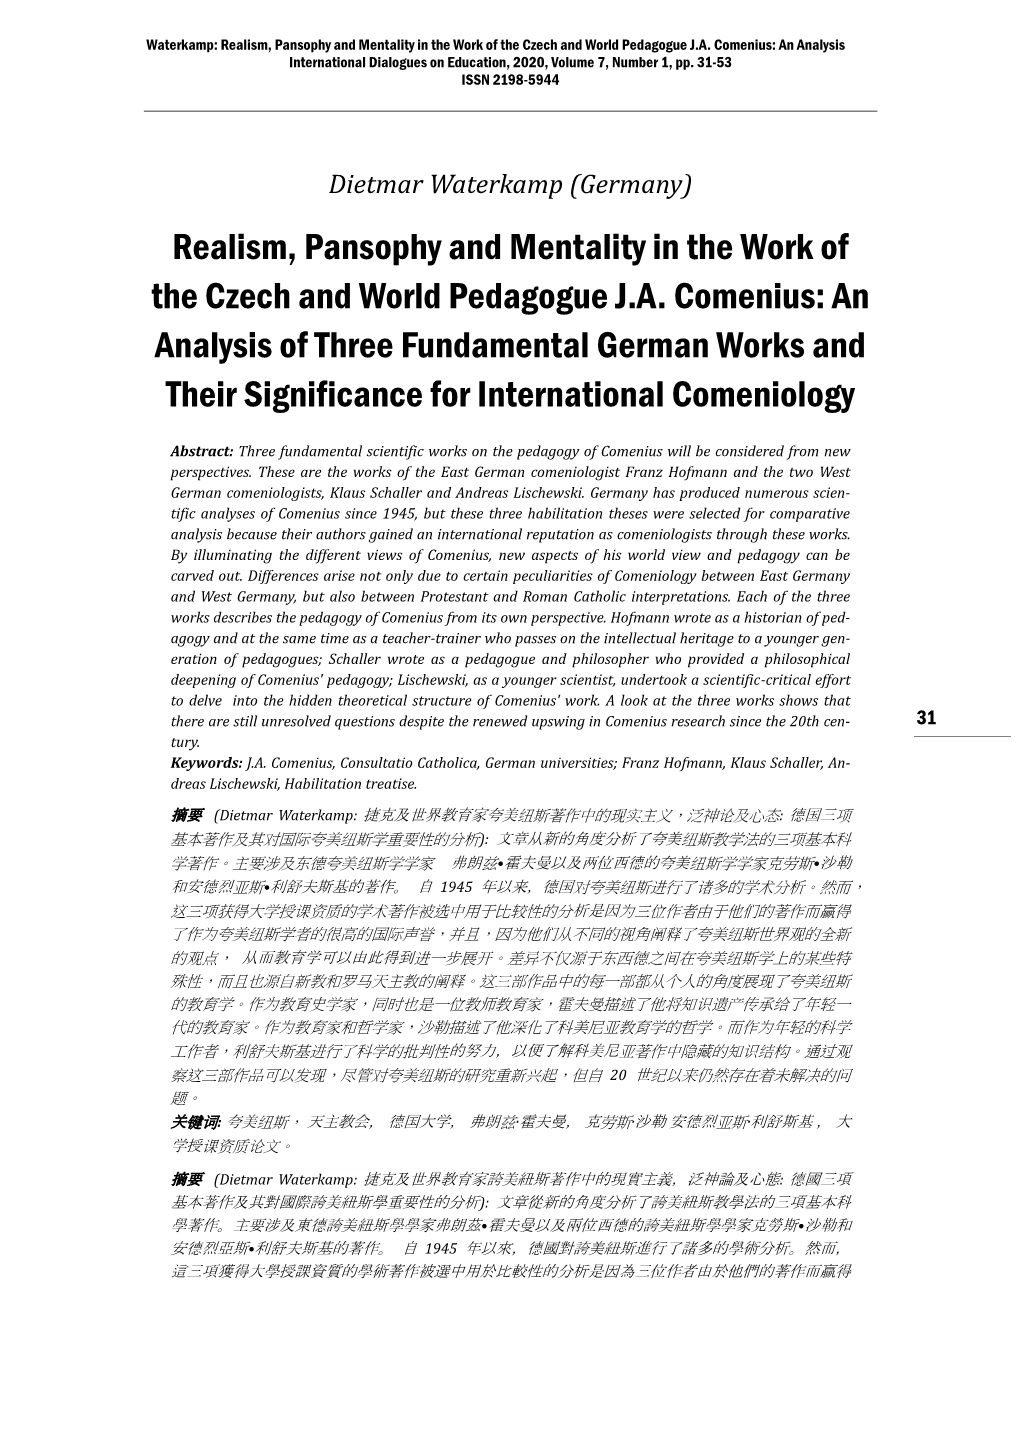 Realism, Pansophy and Mentality in the Work of the Czech and World Pedagogue J.A